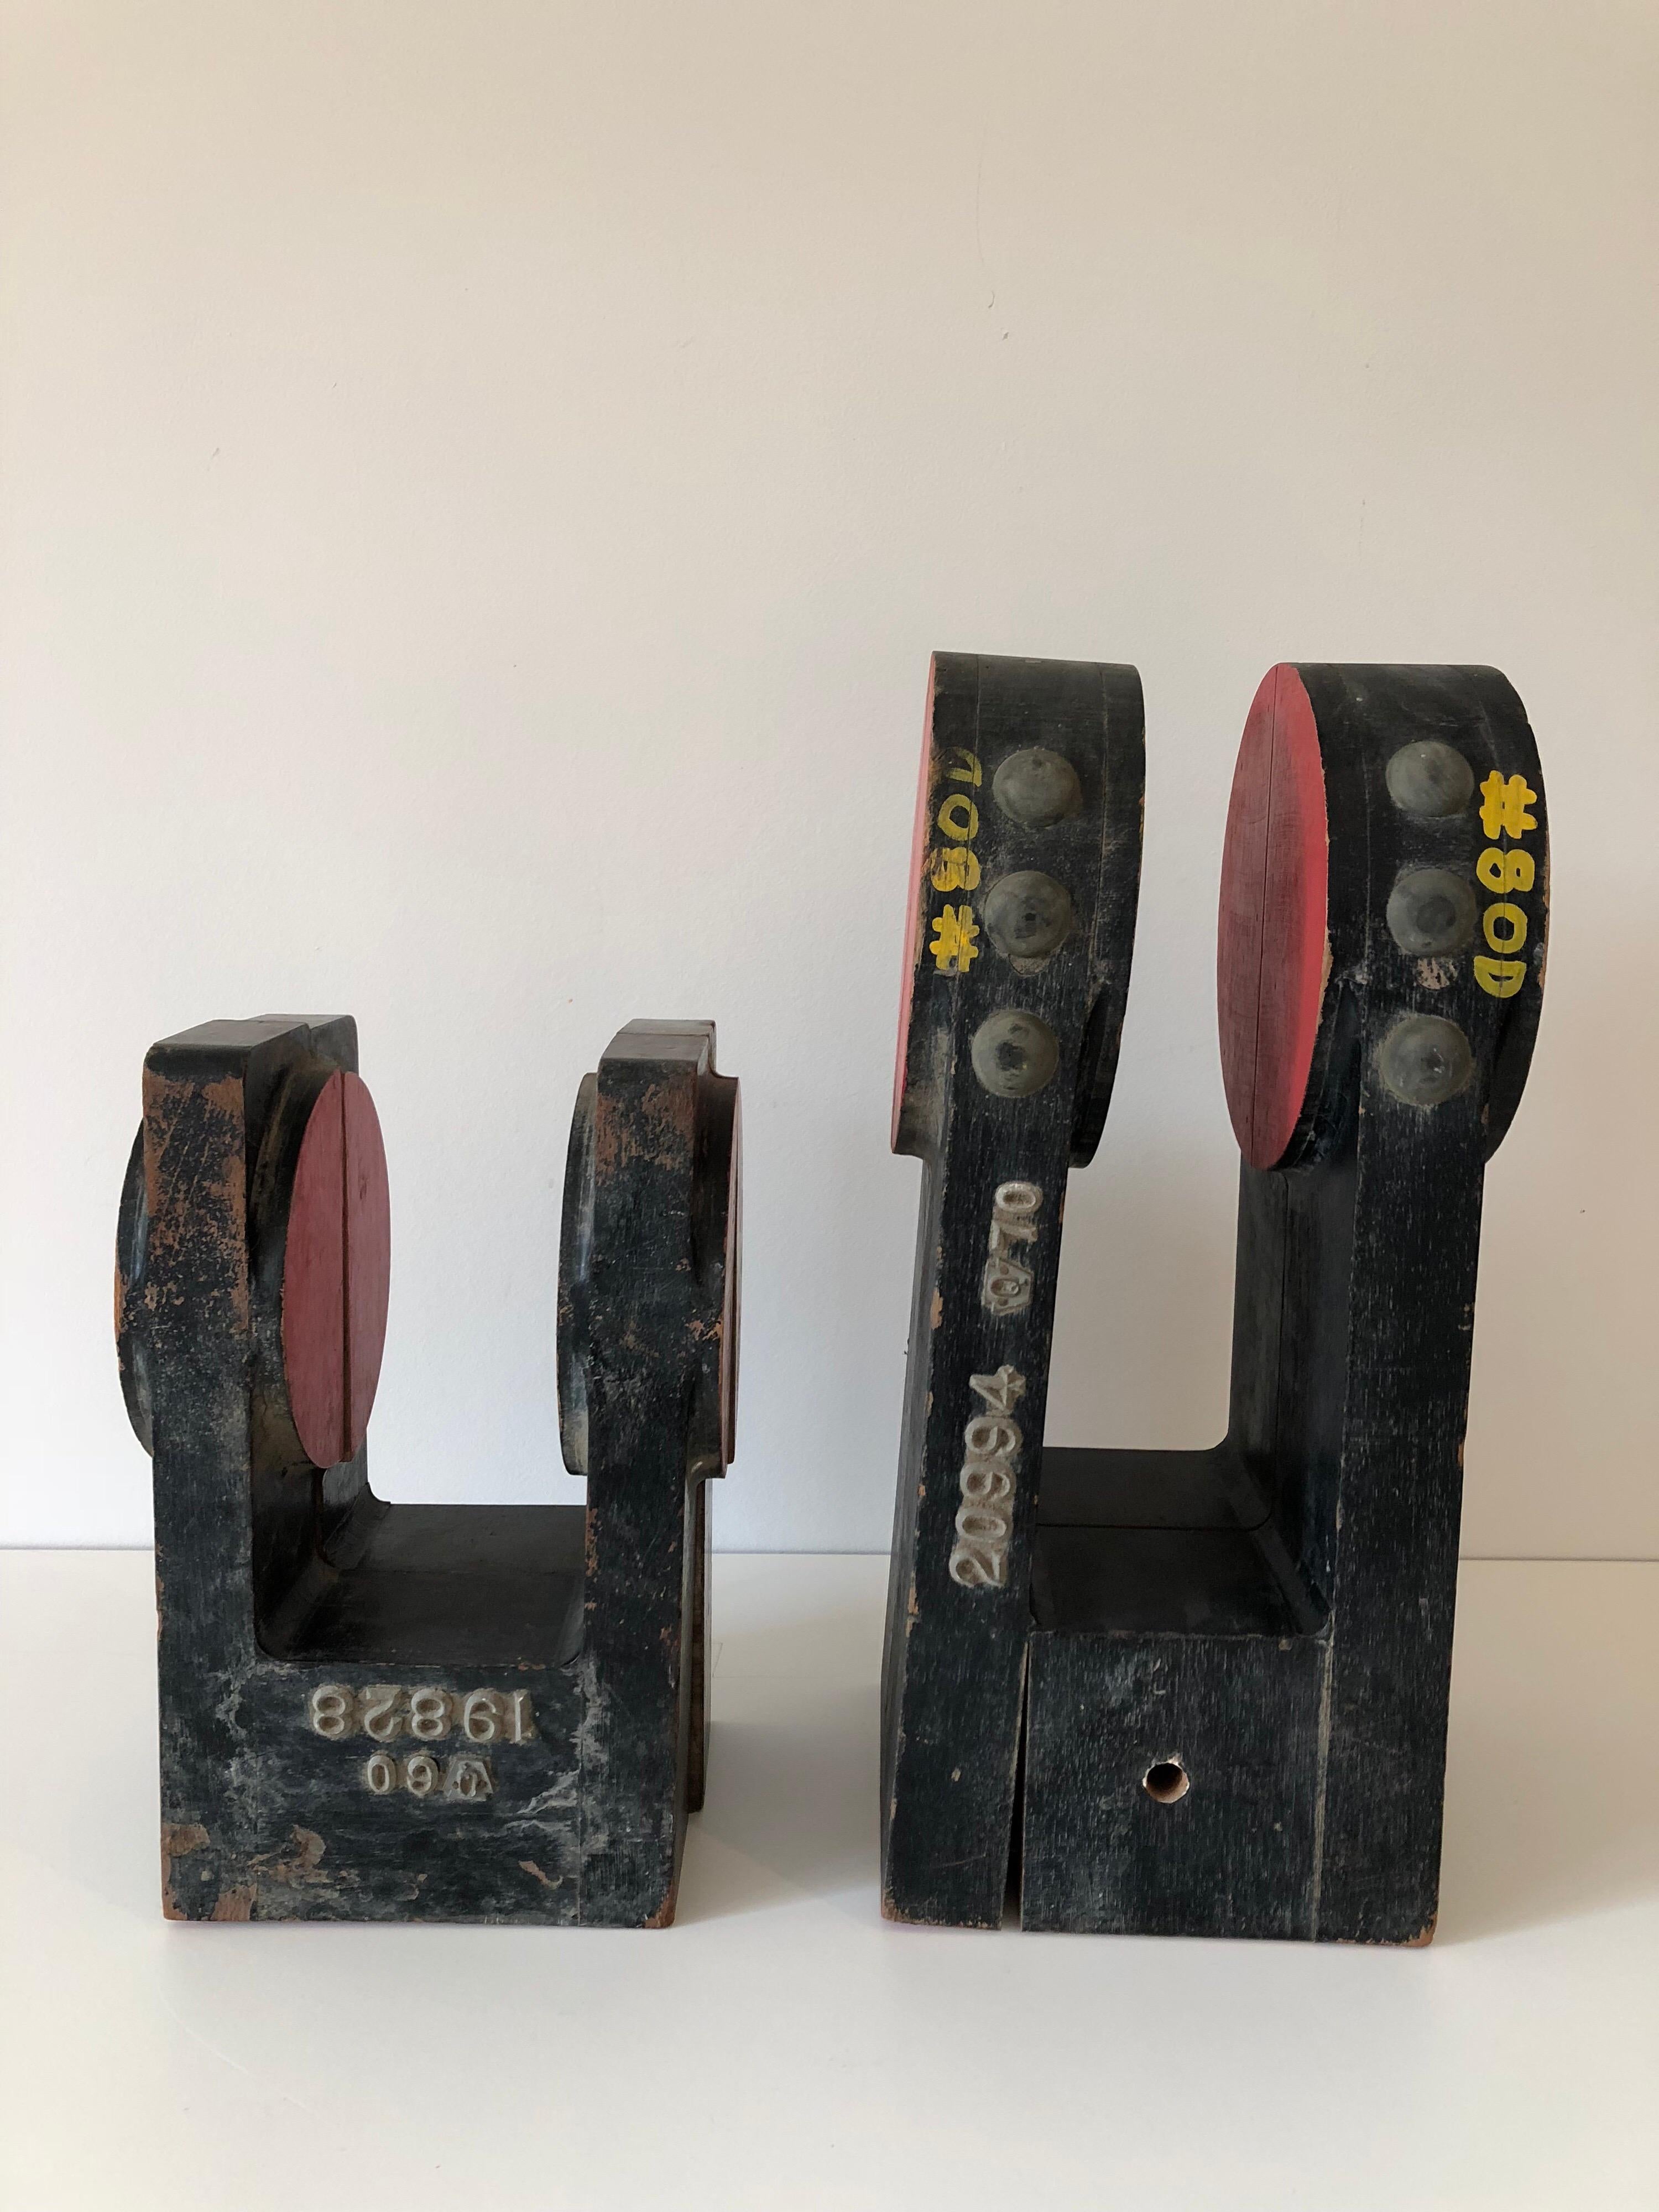 Pair of industrial wood factory mold sculptures. Excellent tabletop decoration or book ends. Each separates in two.
Measures: Large measures 15.25